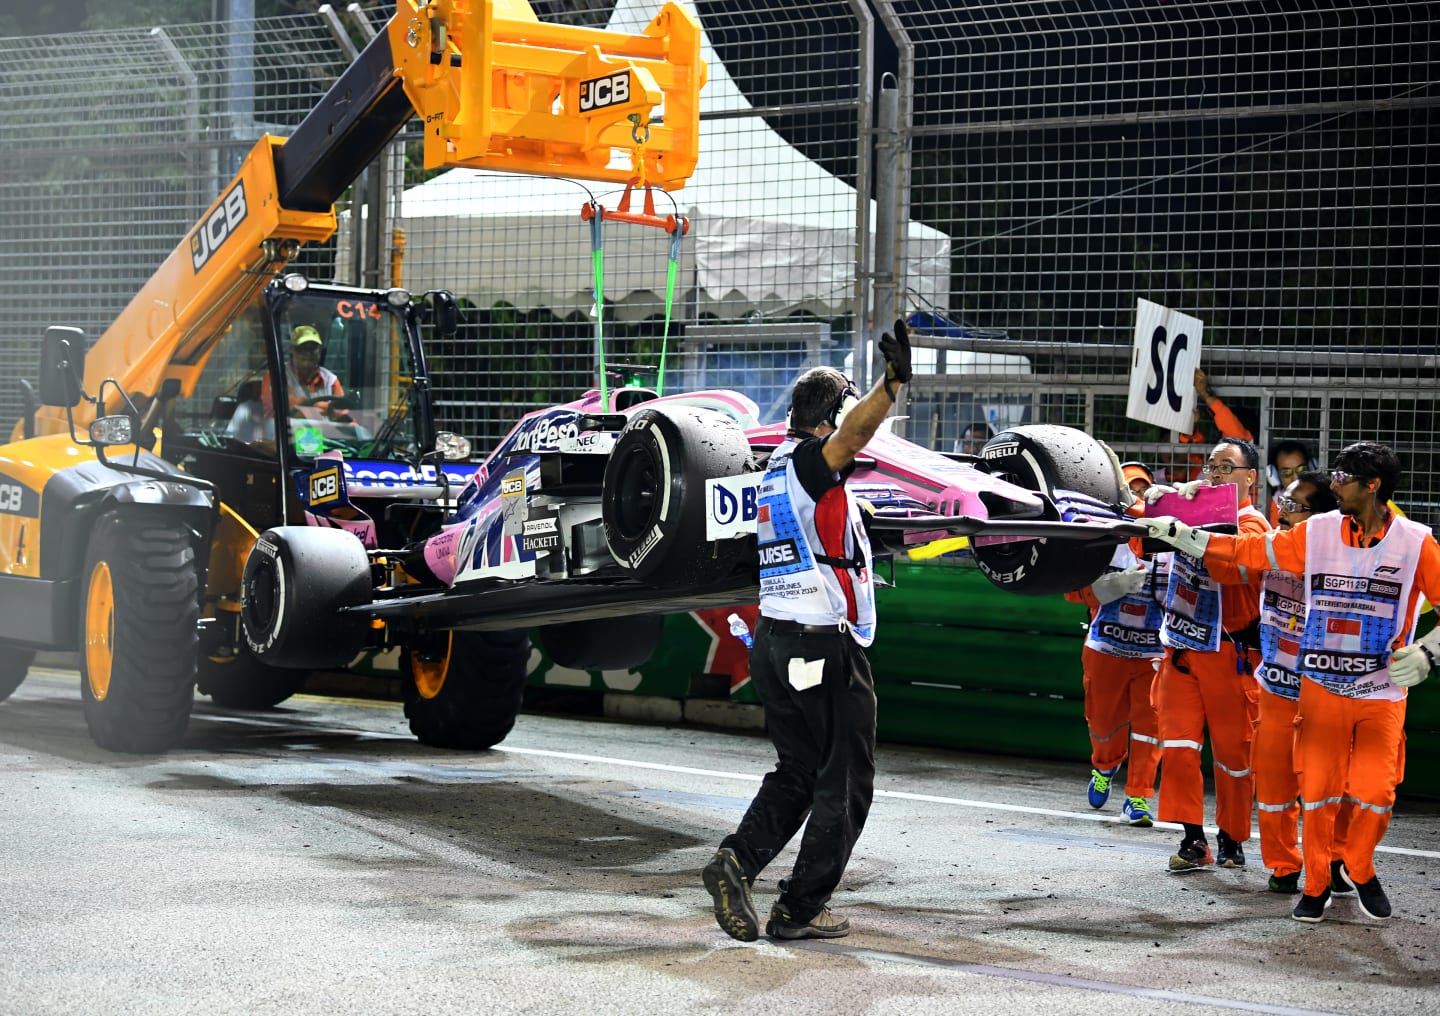 SINGAPORE, SINGAPORE - SEPTEMBER 22: The car of Sergio Perez of Mexico and Racing Point is removed from the circuit after he retired during the F1 Grand Prix of Singapore at Marina Bay Street Circuit on September 22, 2019 in Singapore. (Photo by Clive Mason/Getty Images)